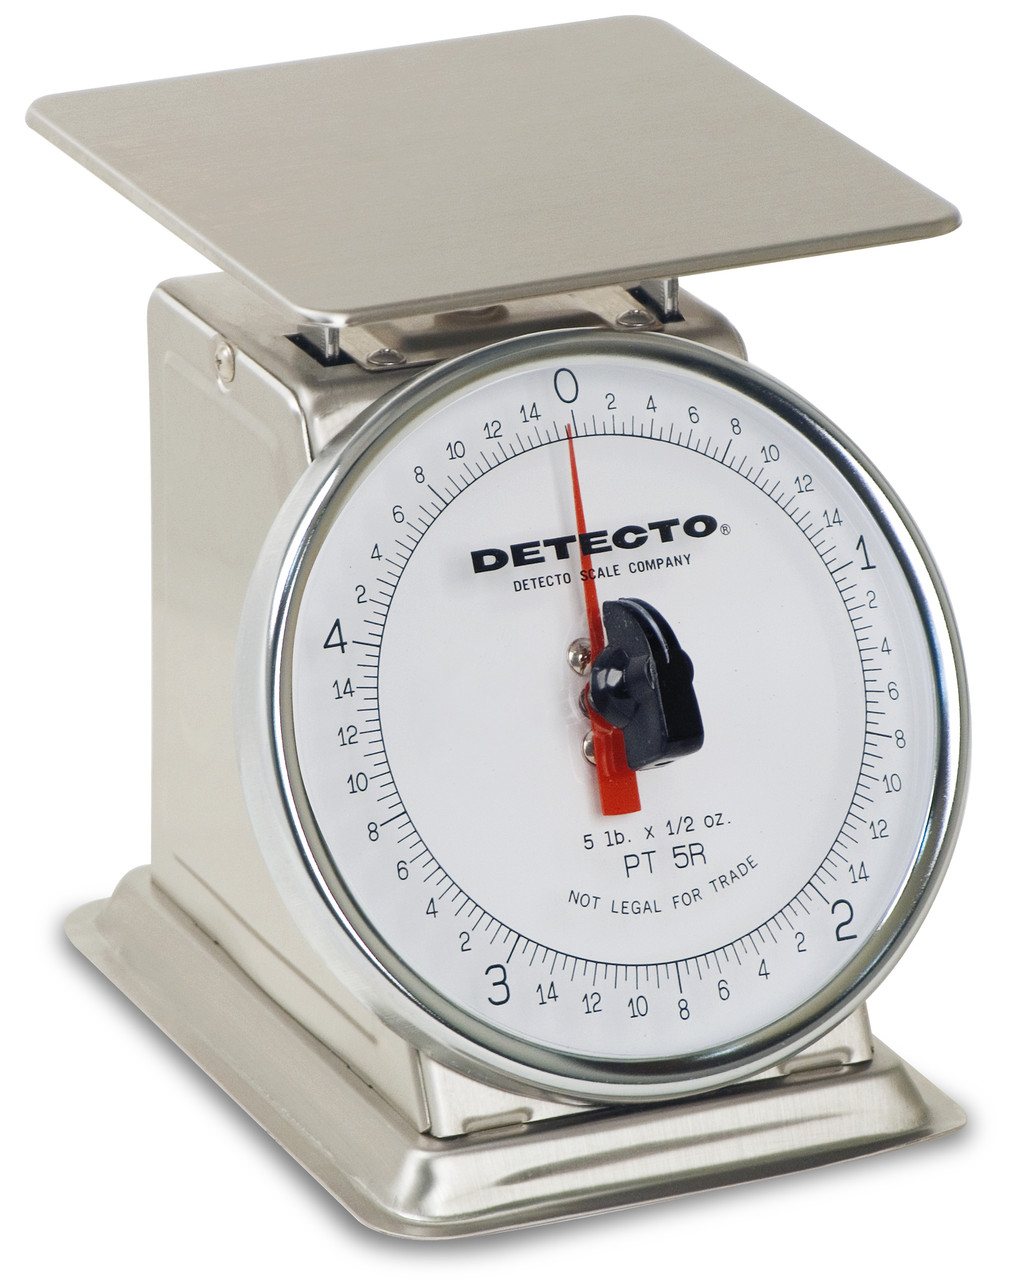 Cardinal Detecto 5 Lb Top Load Rotating Dial Scale 5.75" x 5.75" Stainless Steel, Model# PT-5-SR